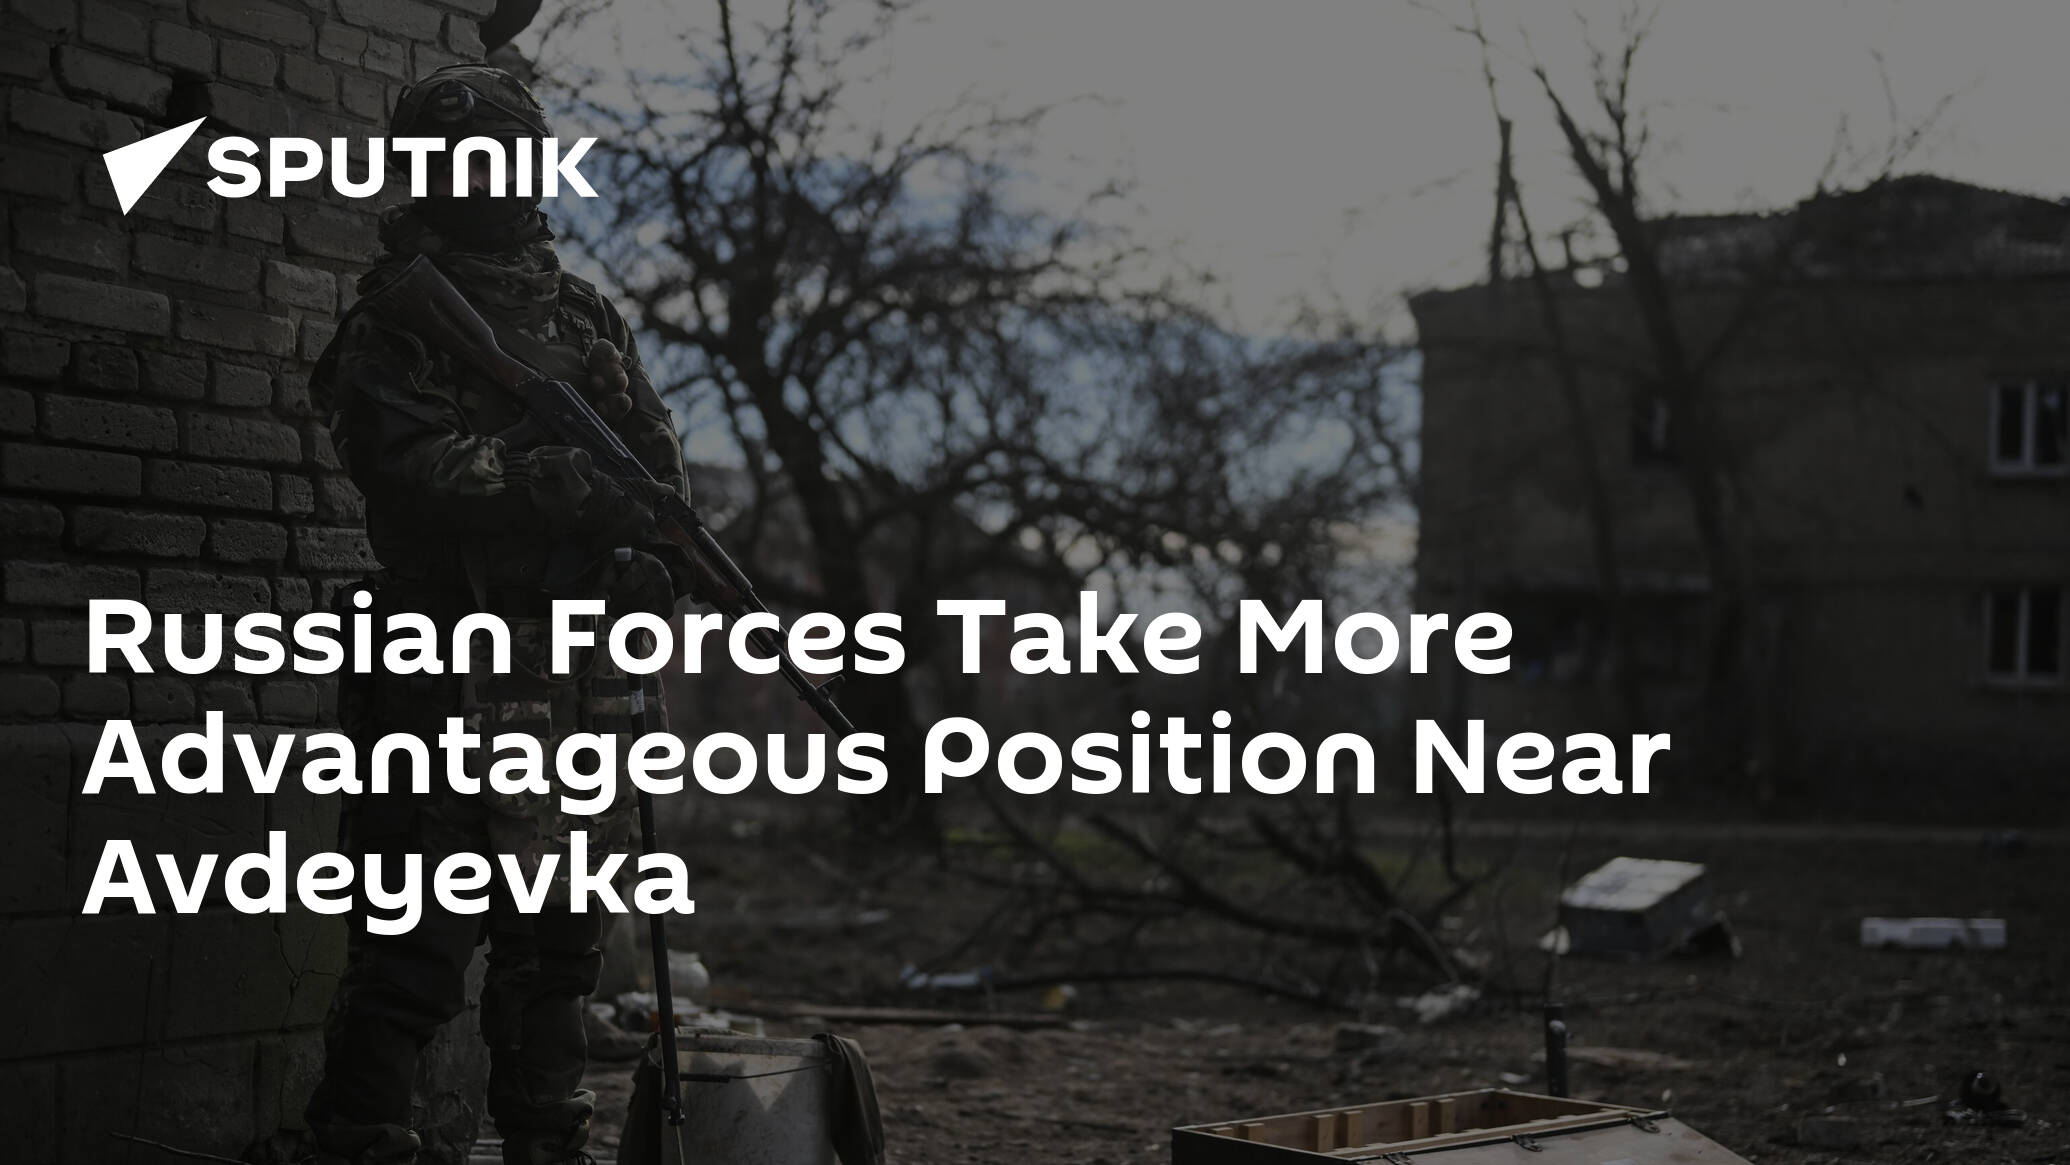 Russian Forces Take More Advantageous Position Near Avdeyevka